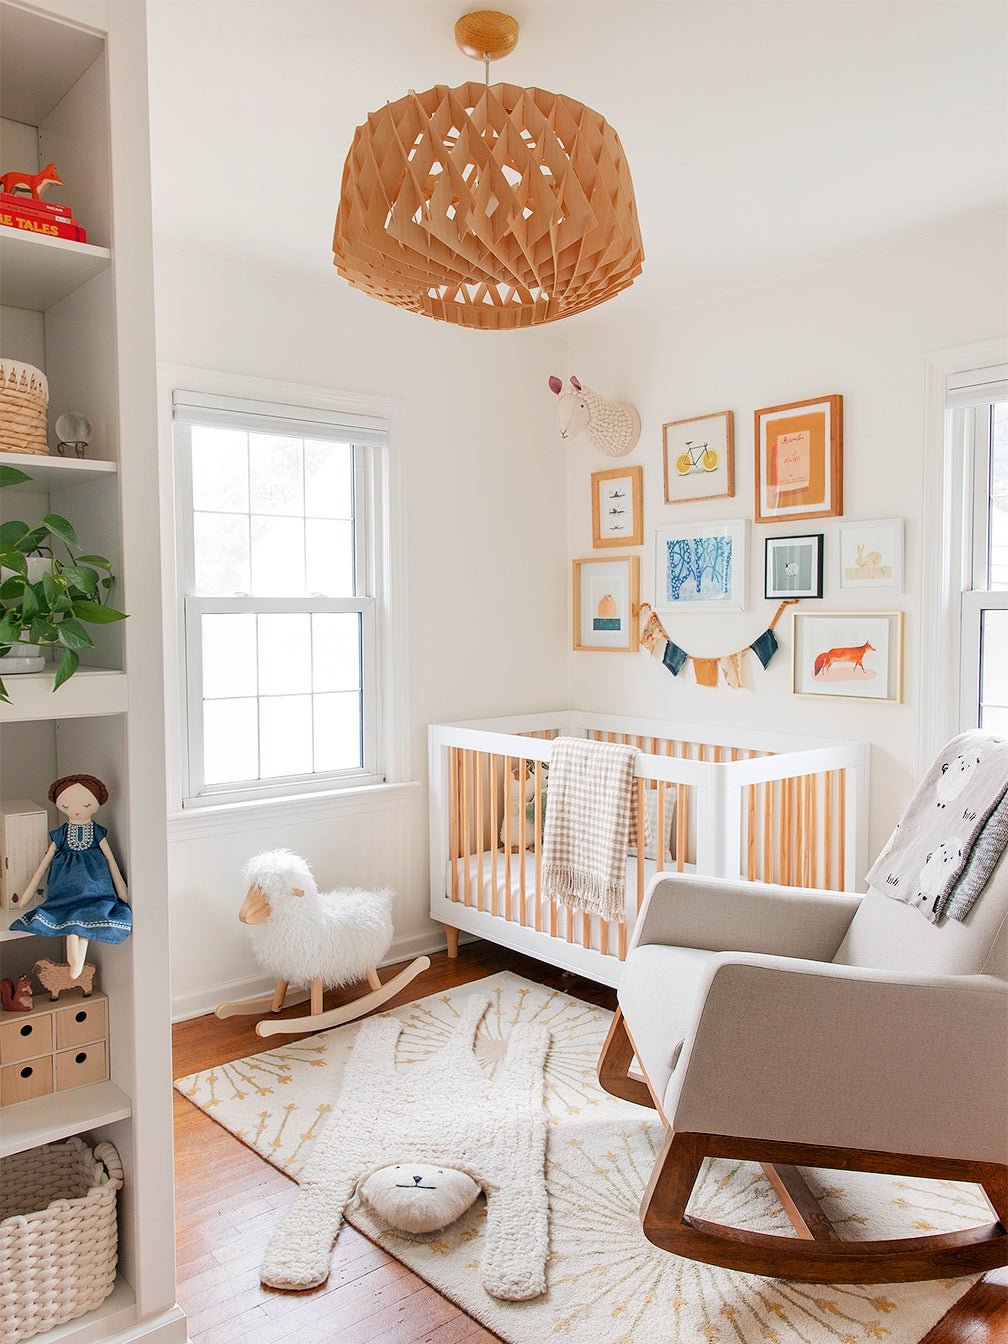 Two $80 IKEA Units Combine and—Poof!—a Storage-Friendly Nursery Is Born